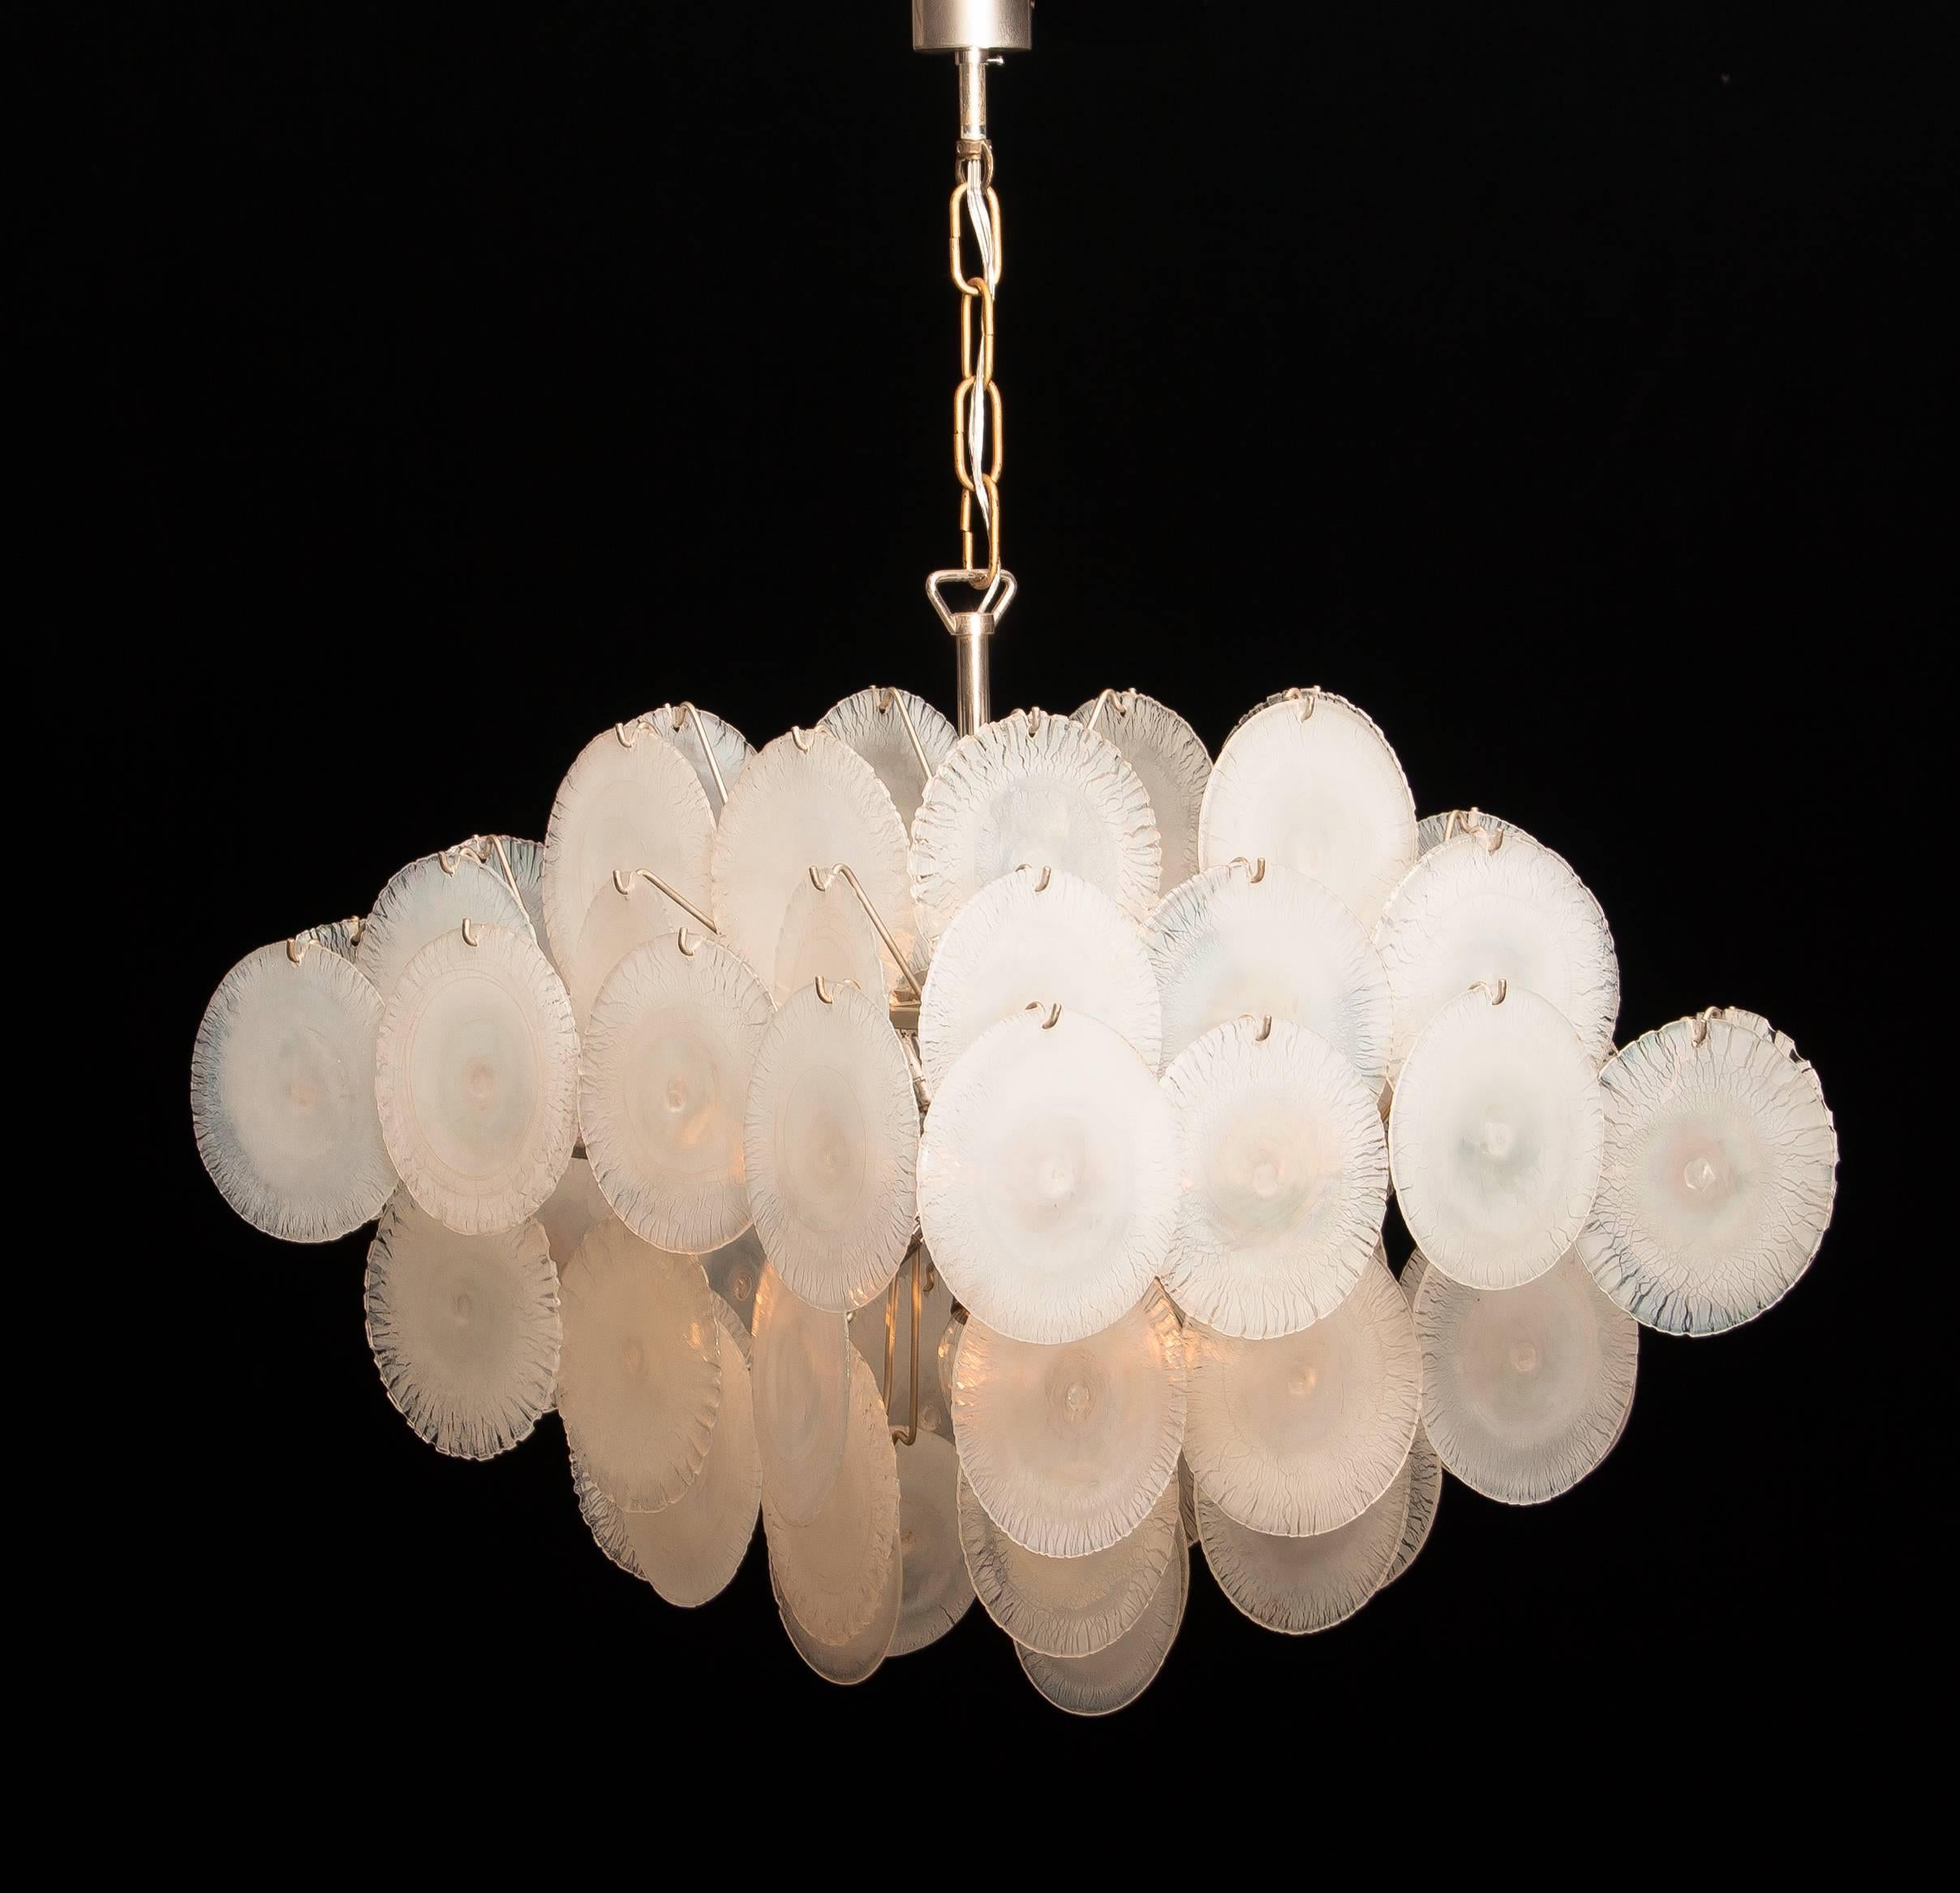 Set of Two Gino Vistosi Chandeliers with White or Pearl Murano Crystal Discs 11